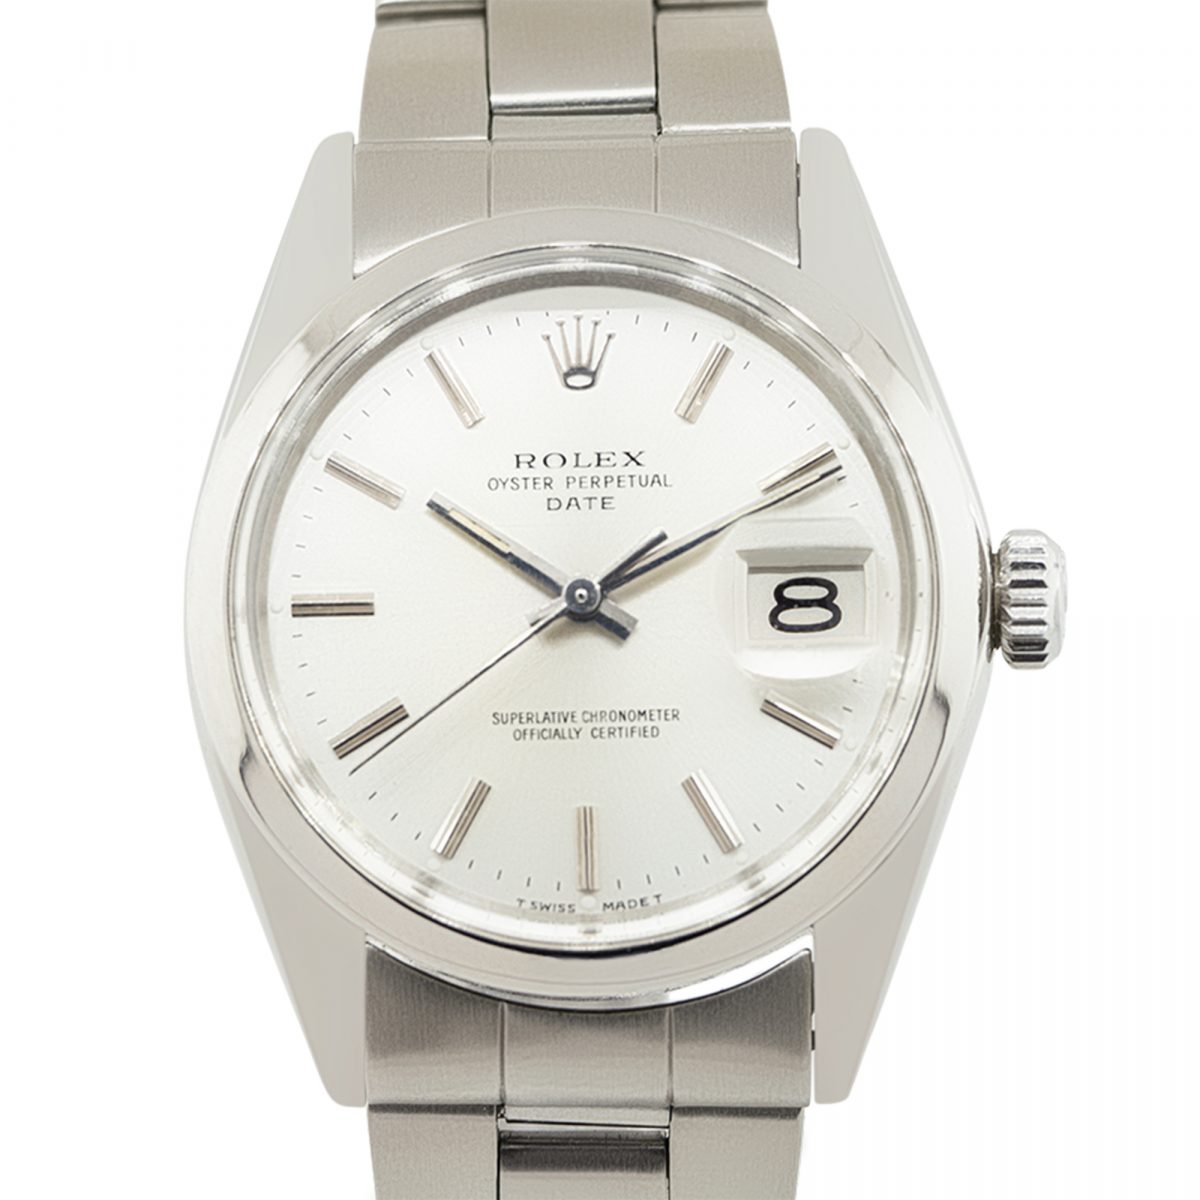 Rolex 1500 Oyster Perpetual Silver Dial With Date Stainless Steel Watch